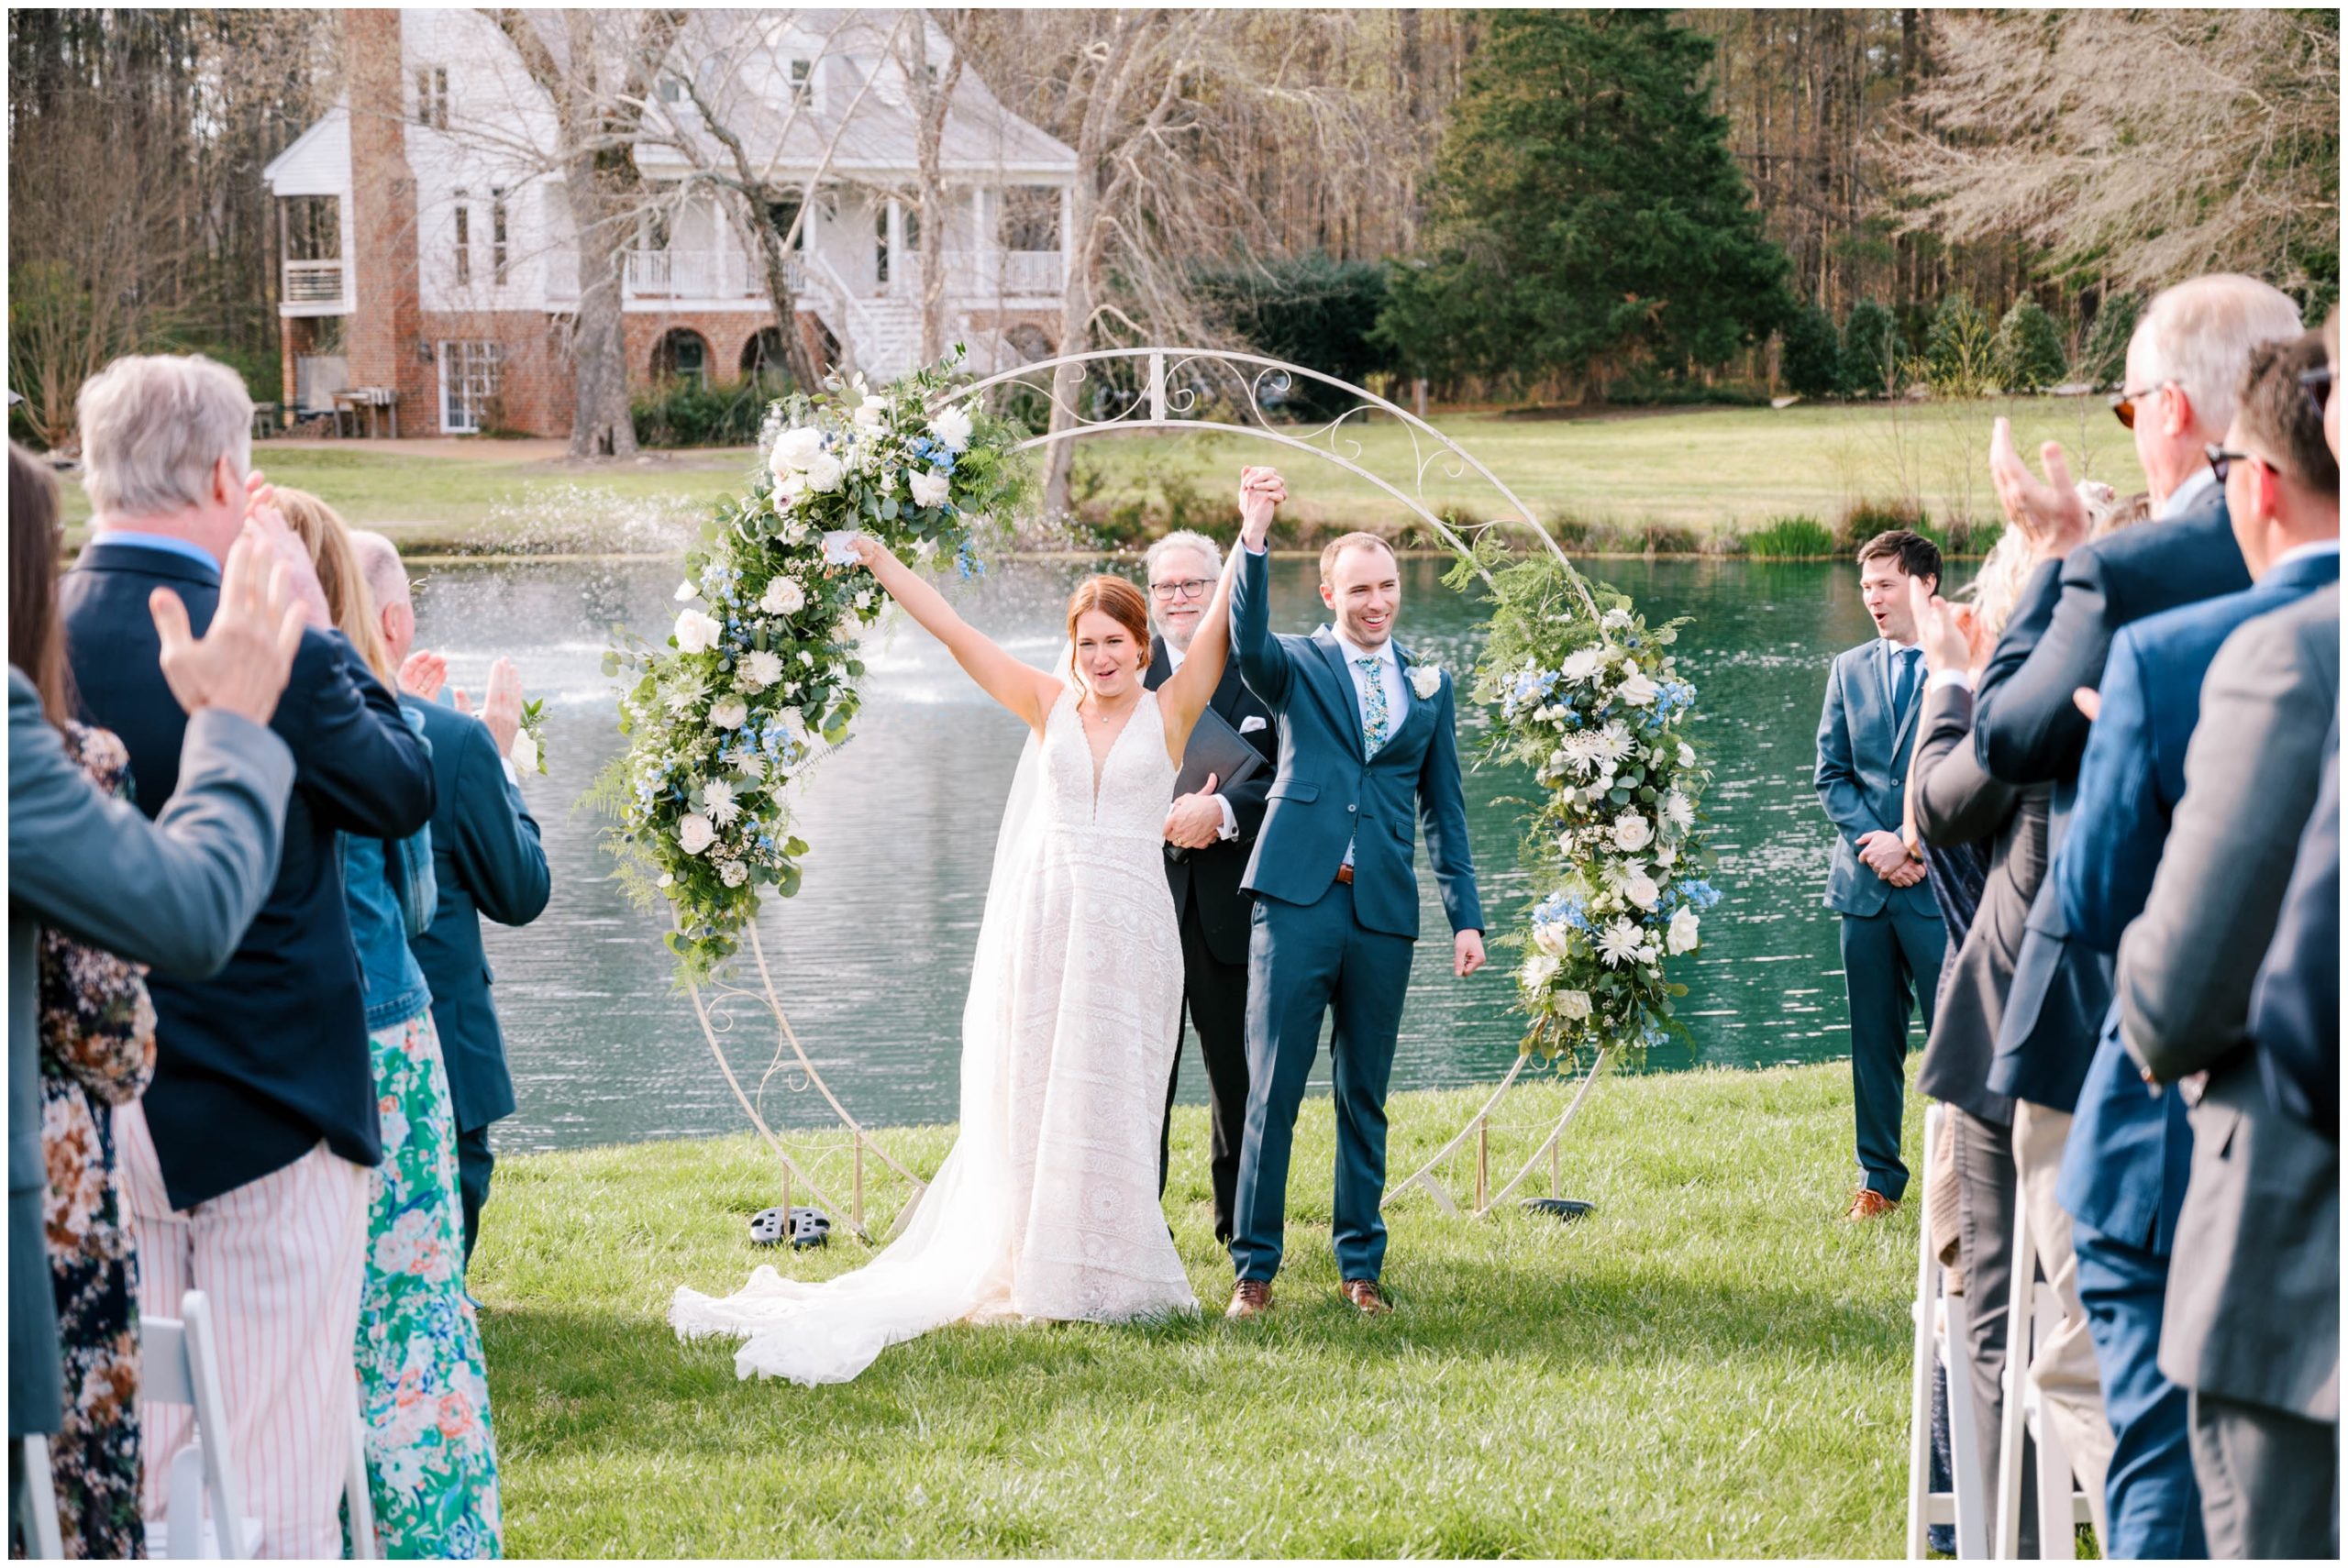 Outdoor spring wedding ceremony in the pavilion gardens at Walnut Hill